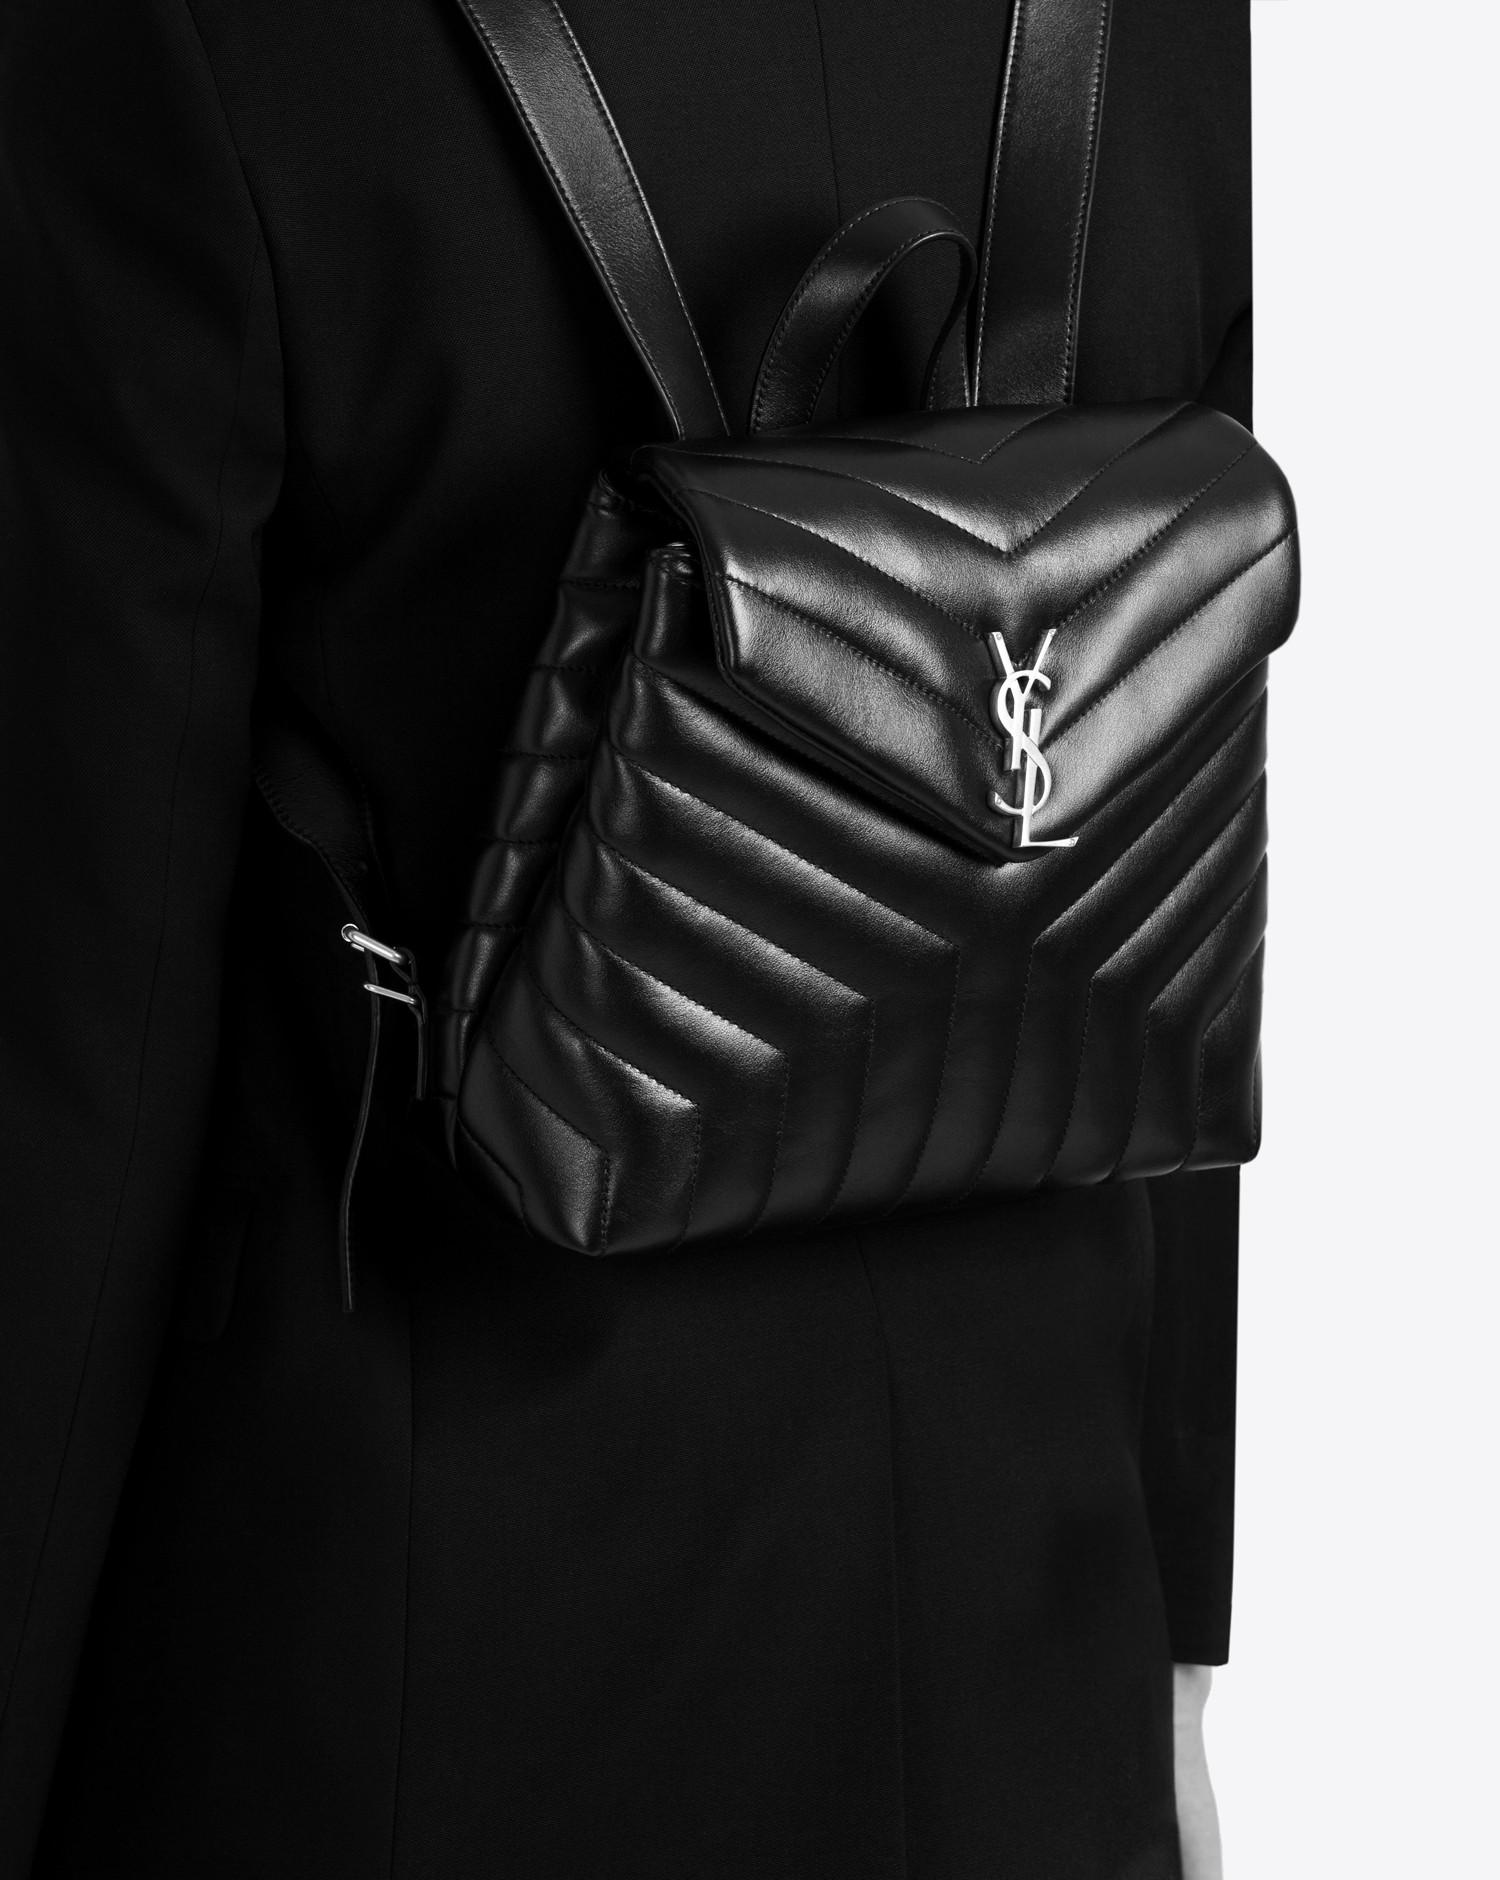 Saint Laurent Loulou Small Backpack In Matelassé "y" Leather in Black | Lyst